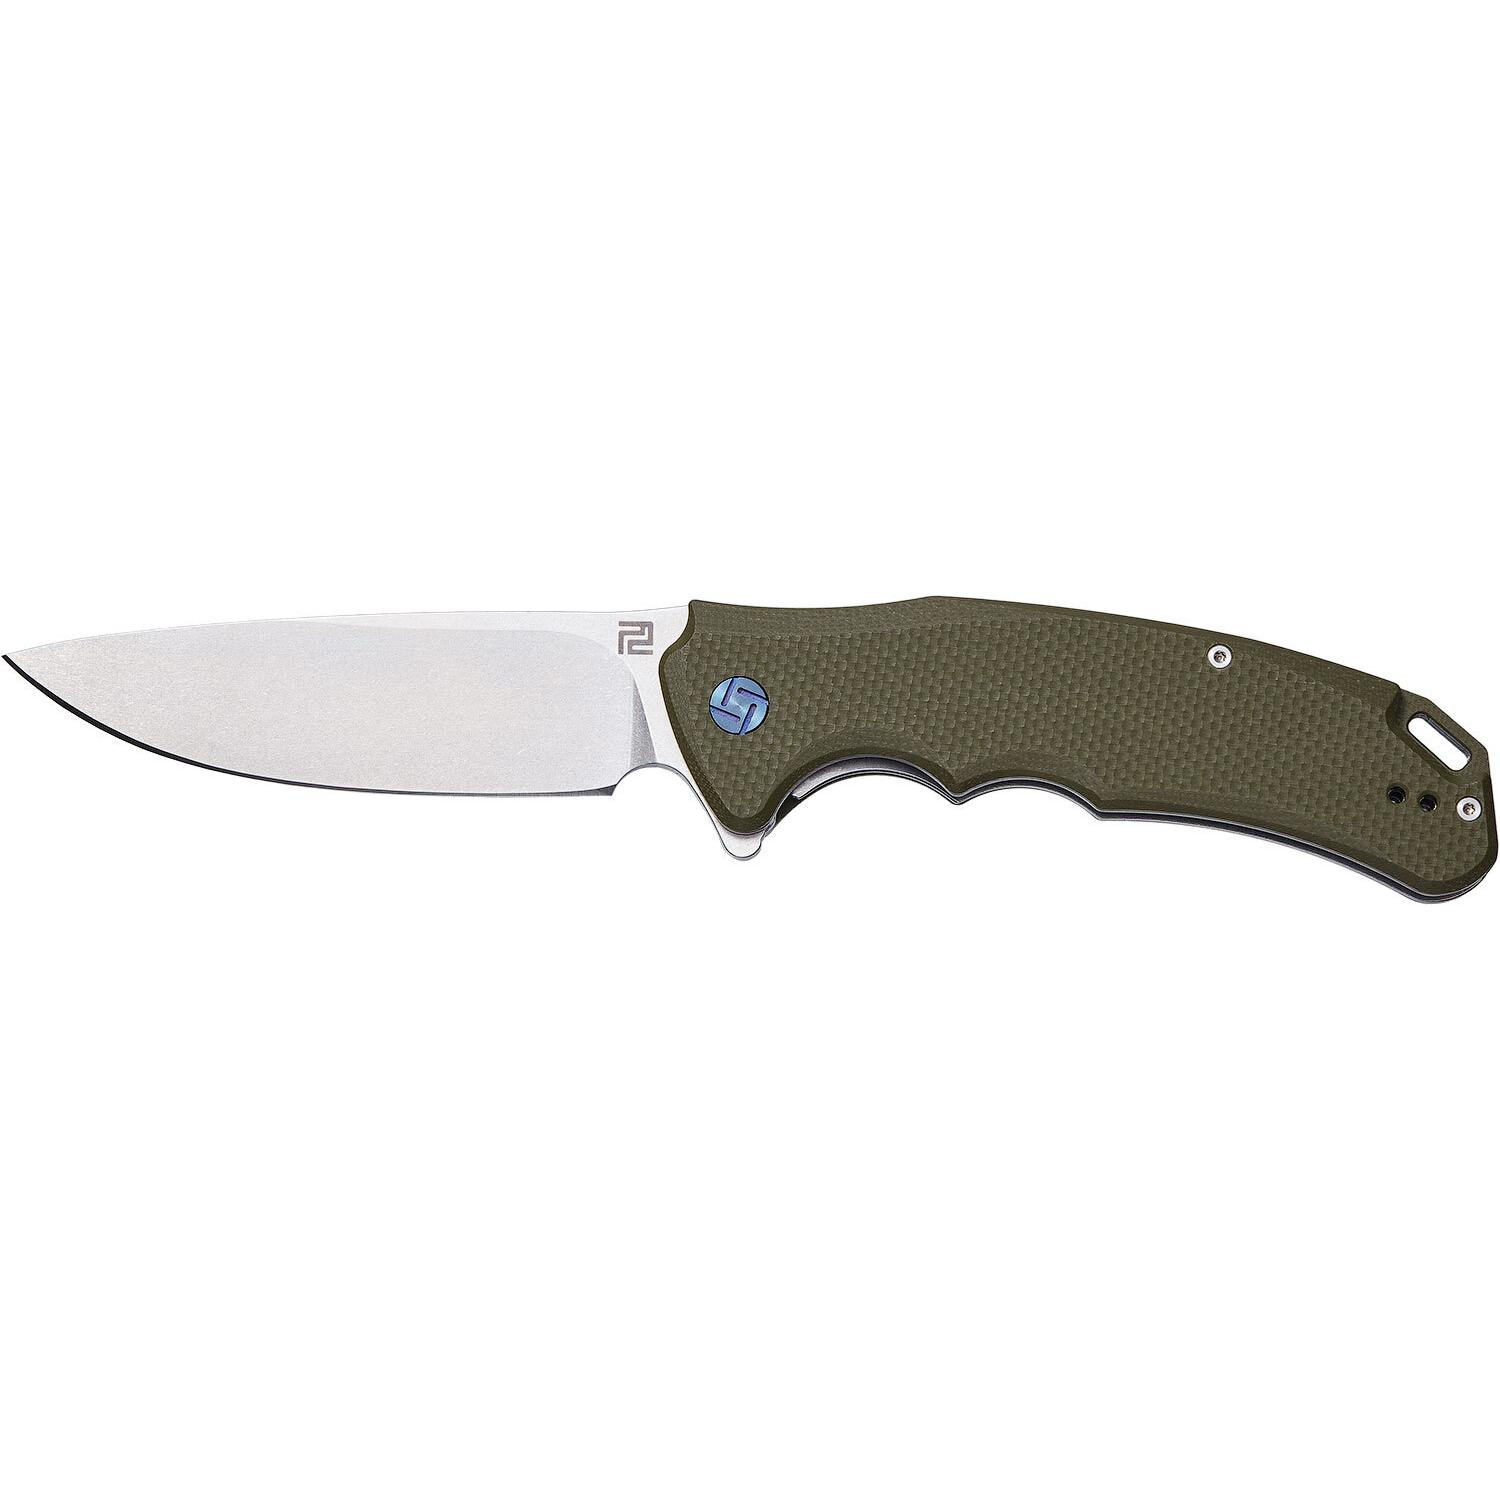 Нож Artisan Tradition SW G10 Olive 1702P-GN 2798.01.11